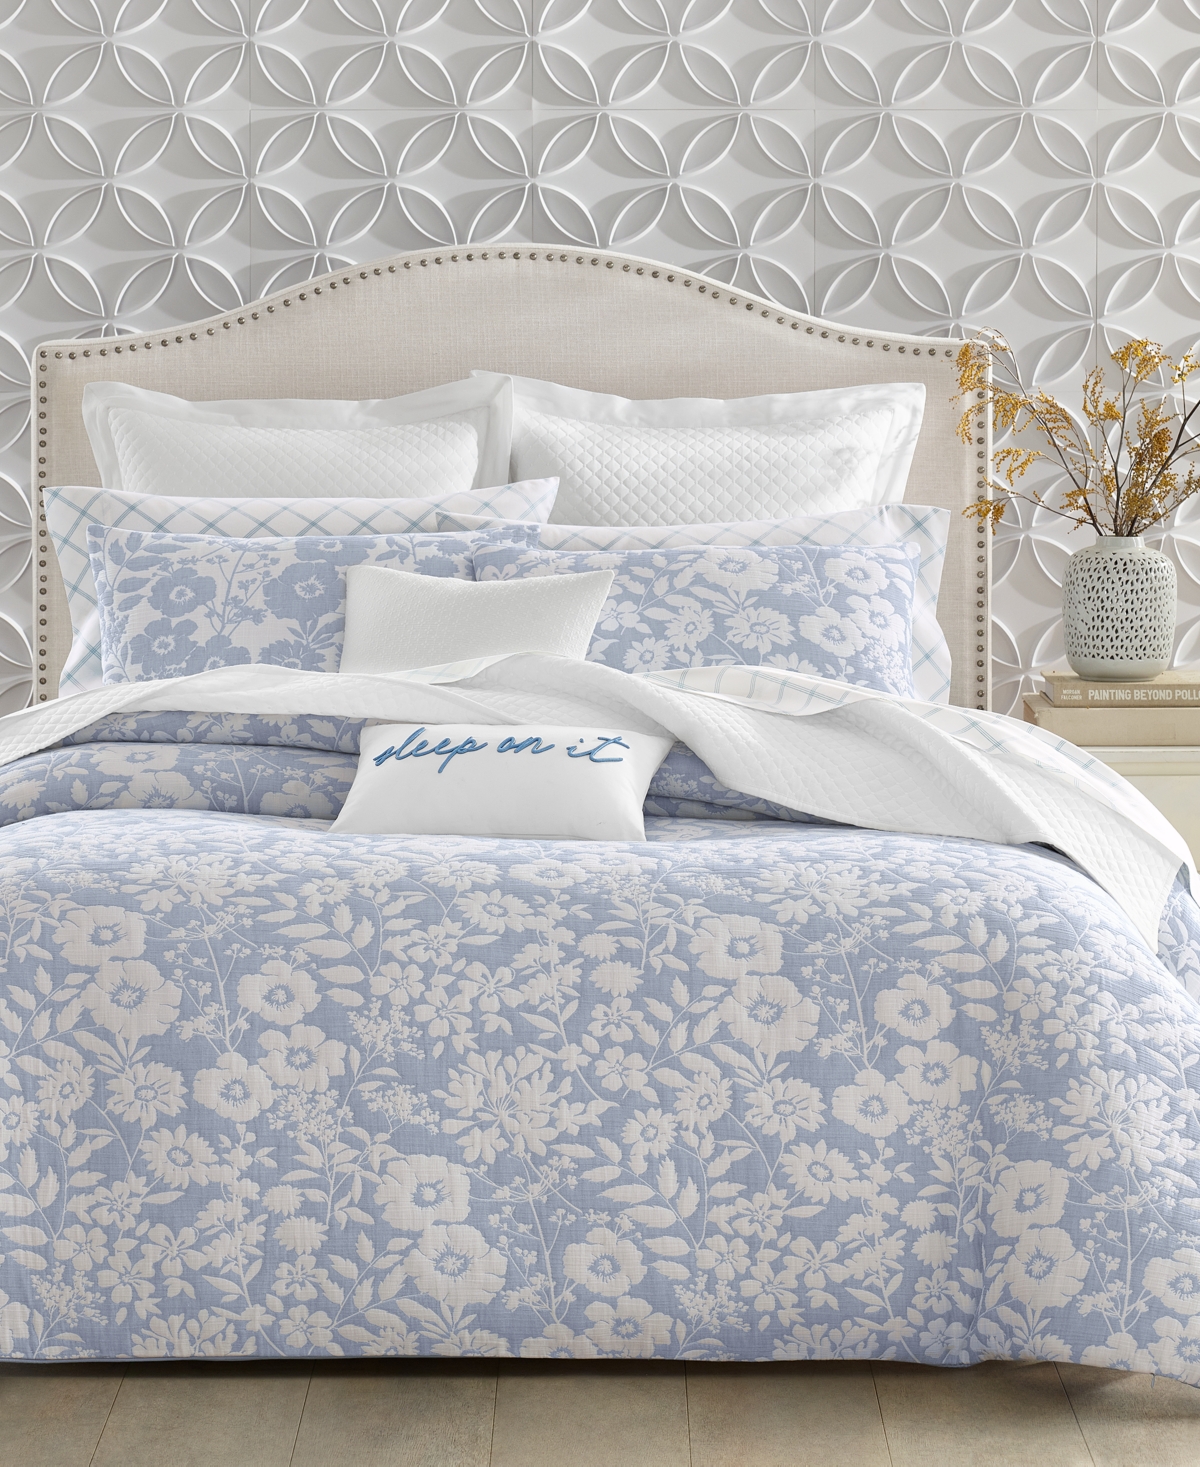 Charter Club Silhouette Floral 2-pc. Duvet Cover Set, Twin, Created For Macy's In Blue